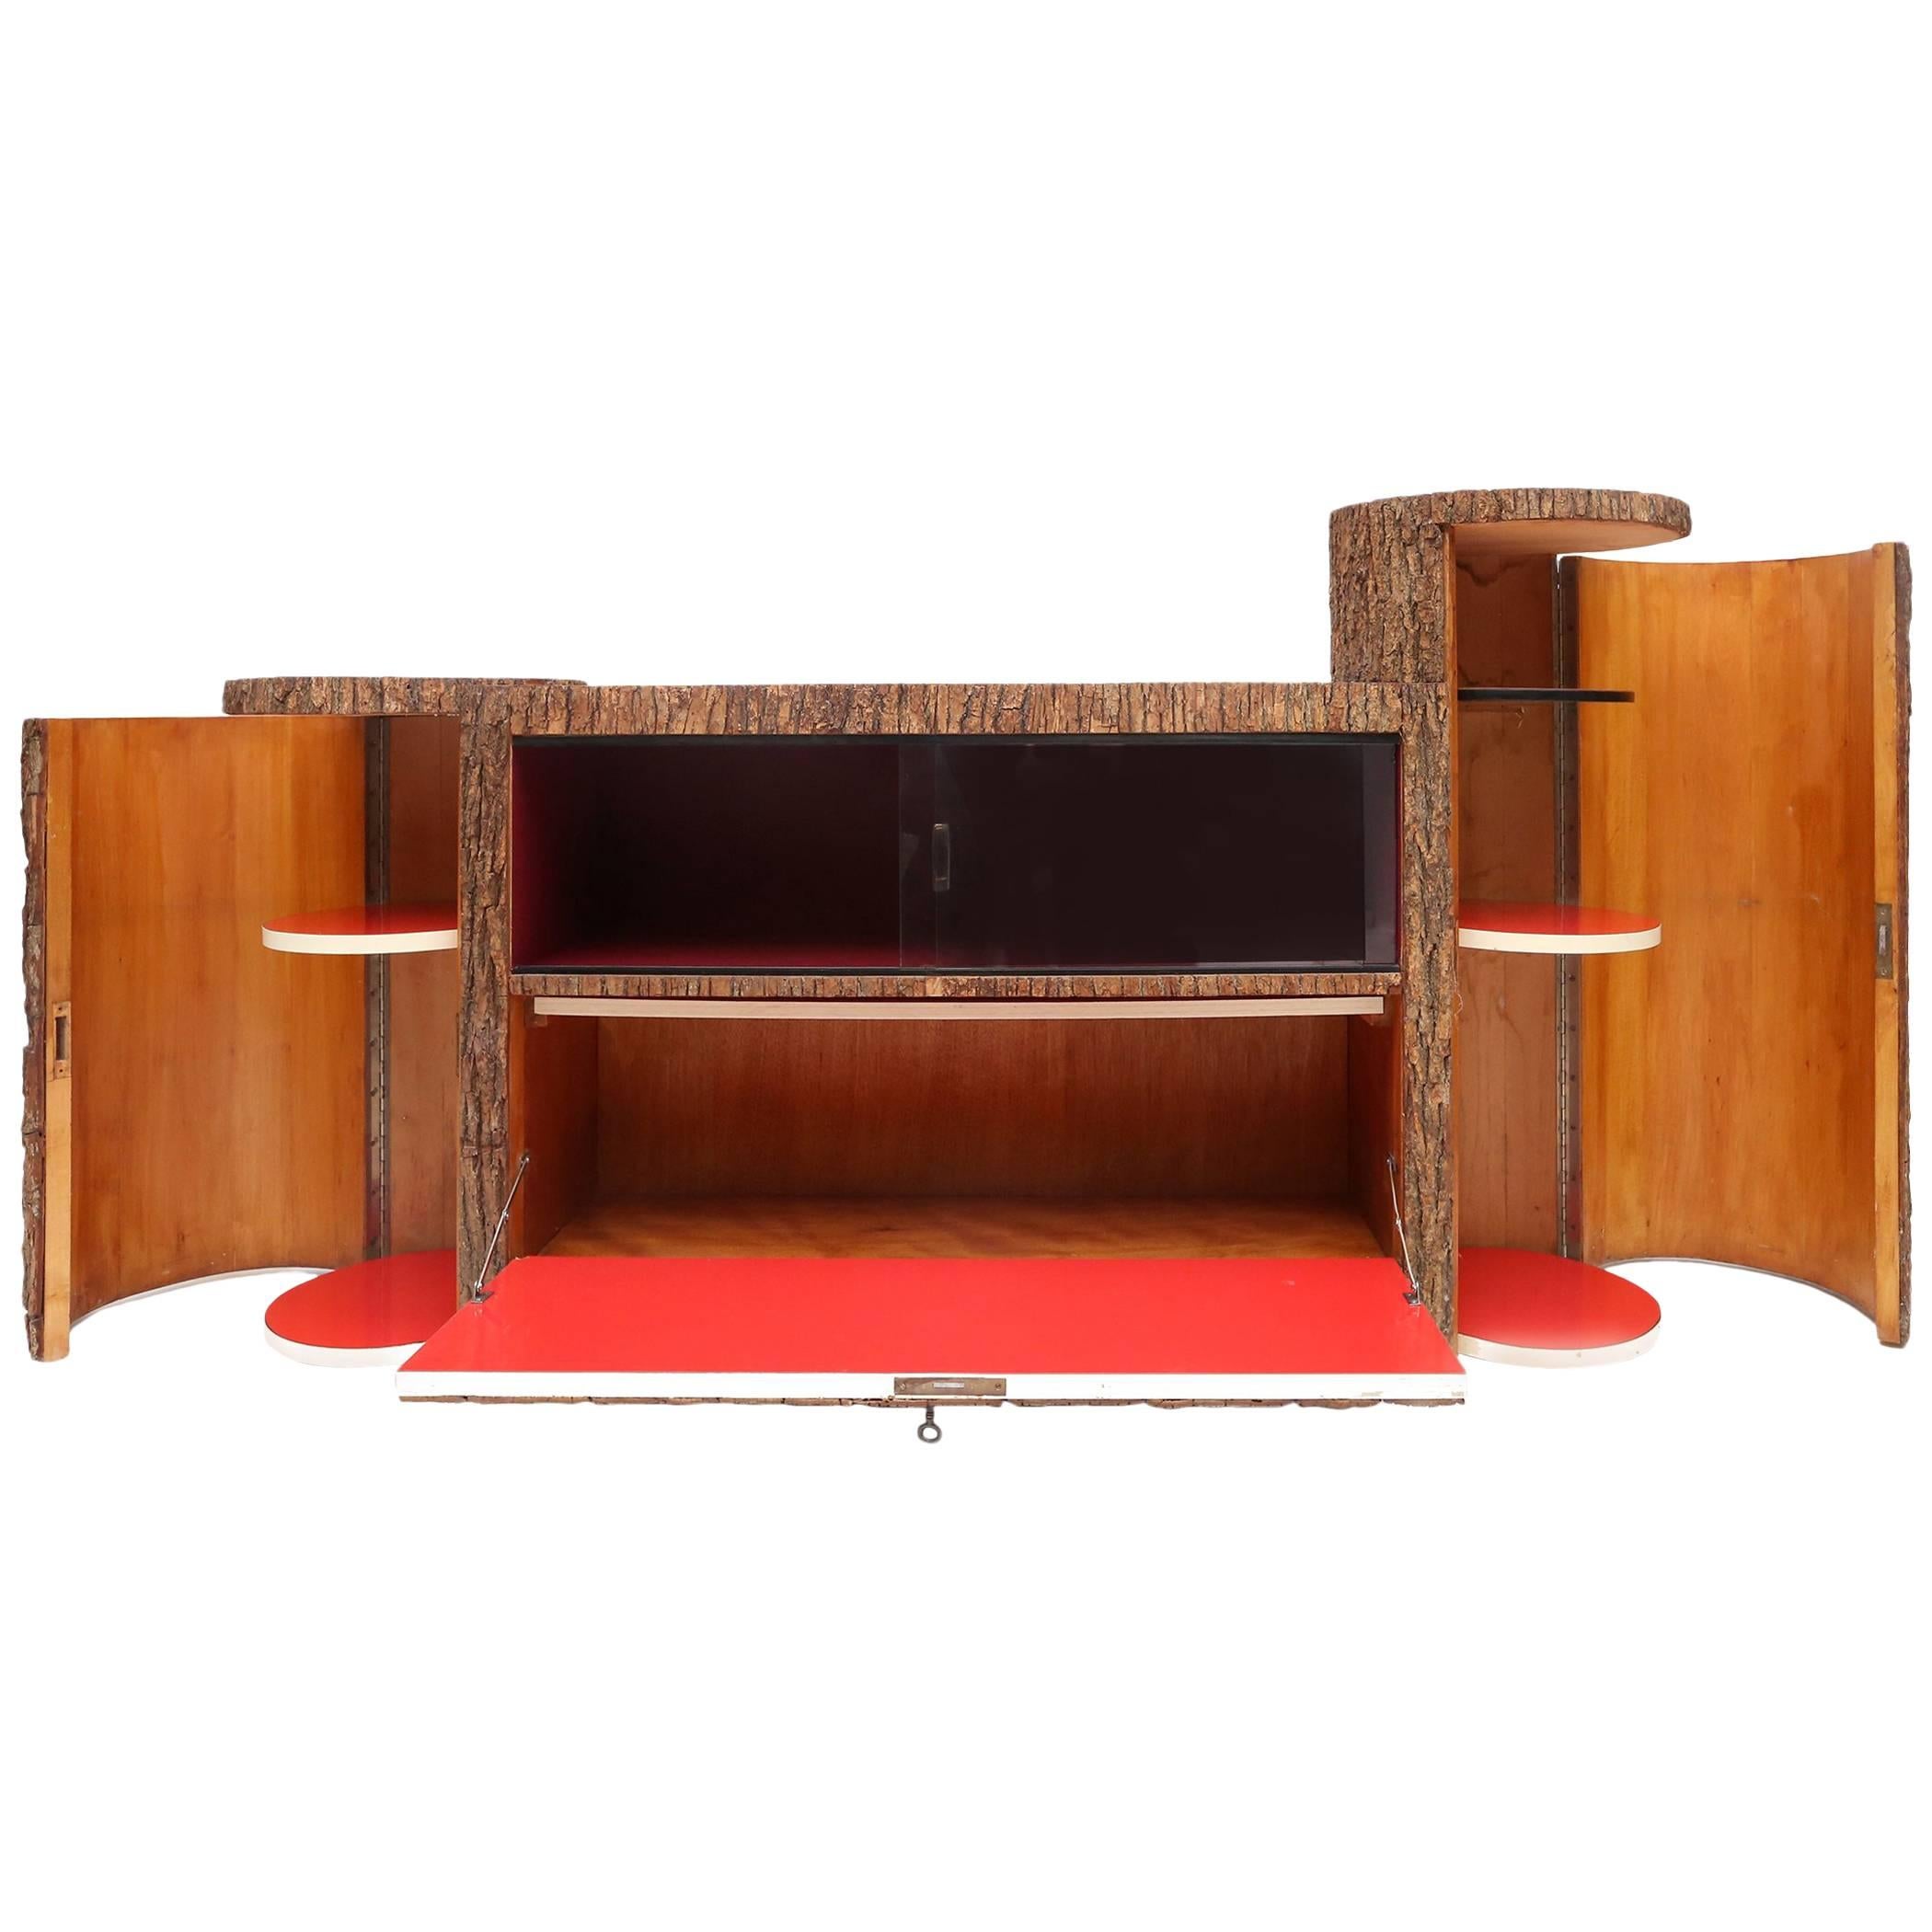 Swiss Rustic Organic Modern Credenza in Bark, 1950s For Sale